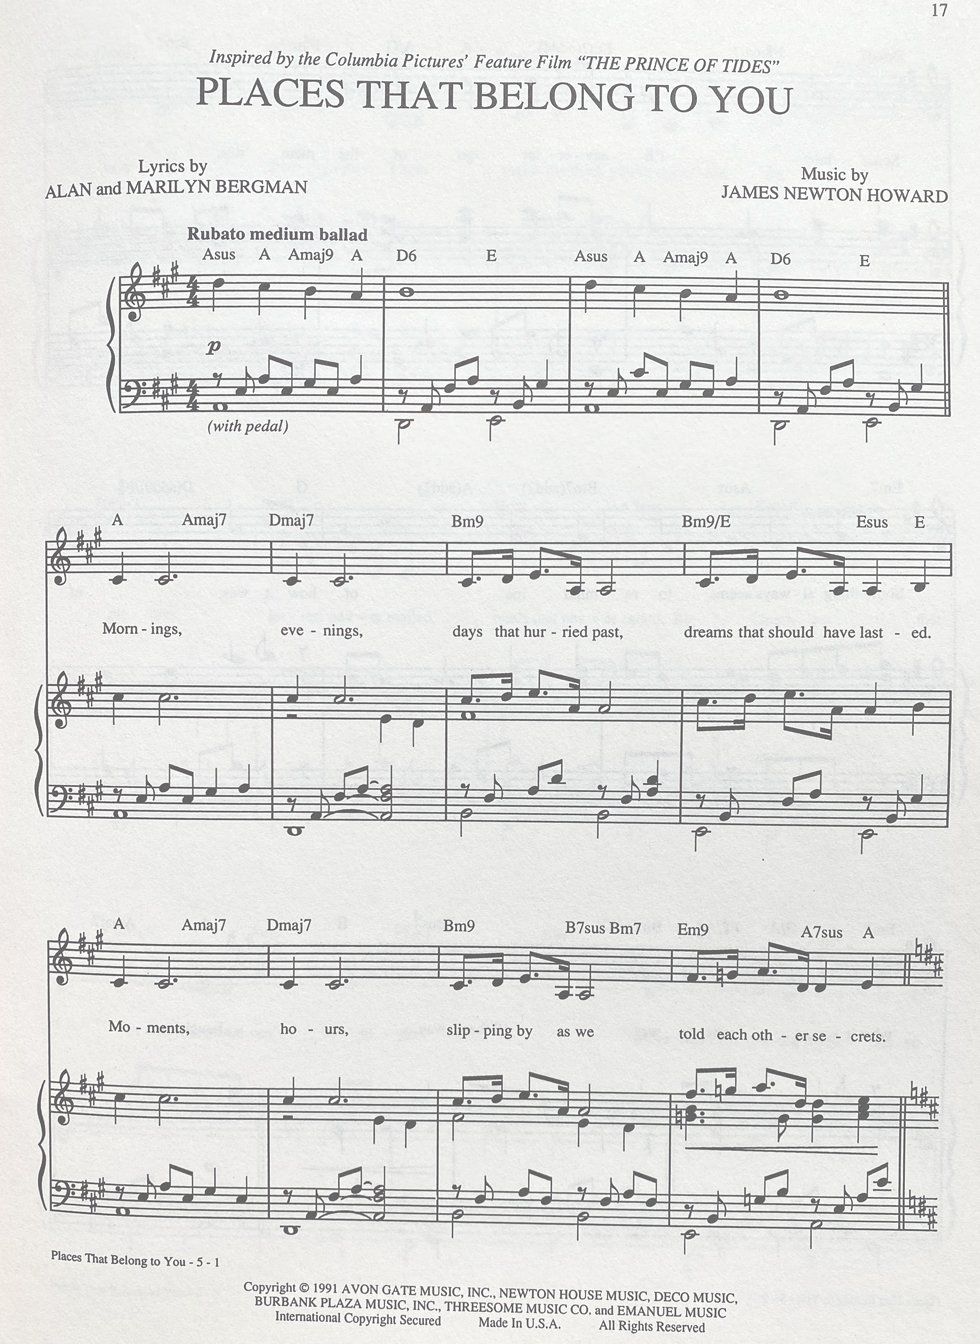 The sheet music for the song 